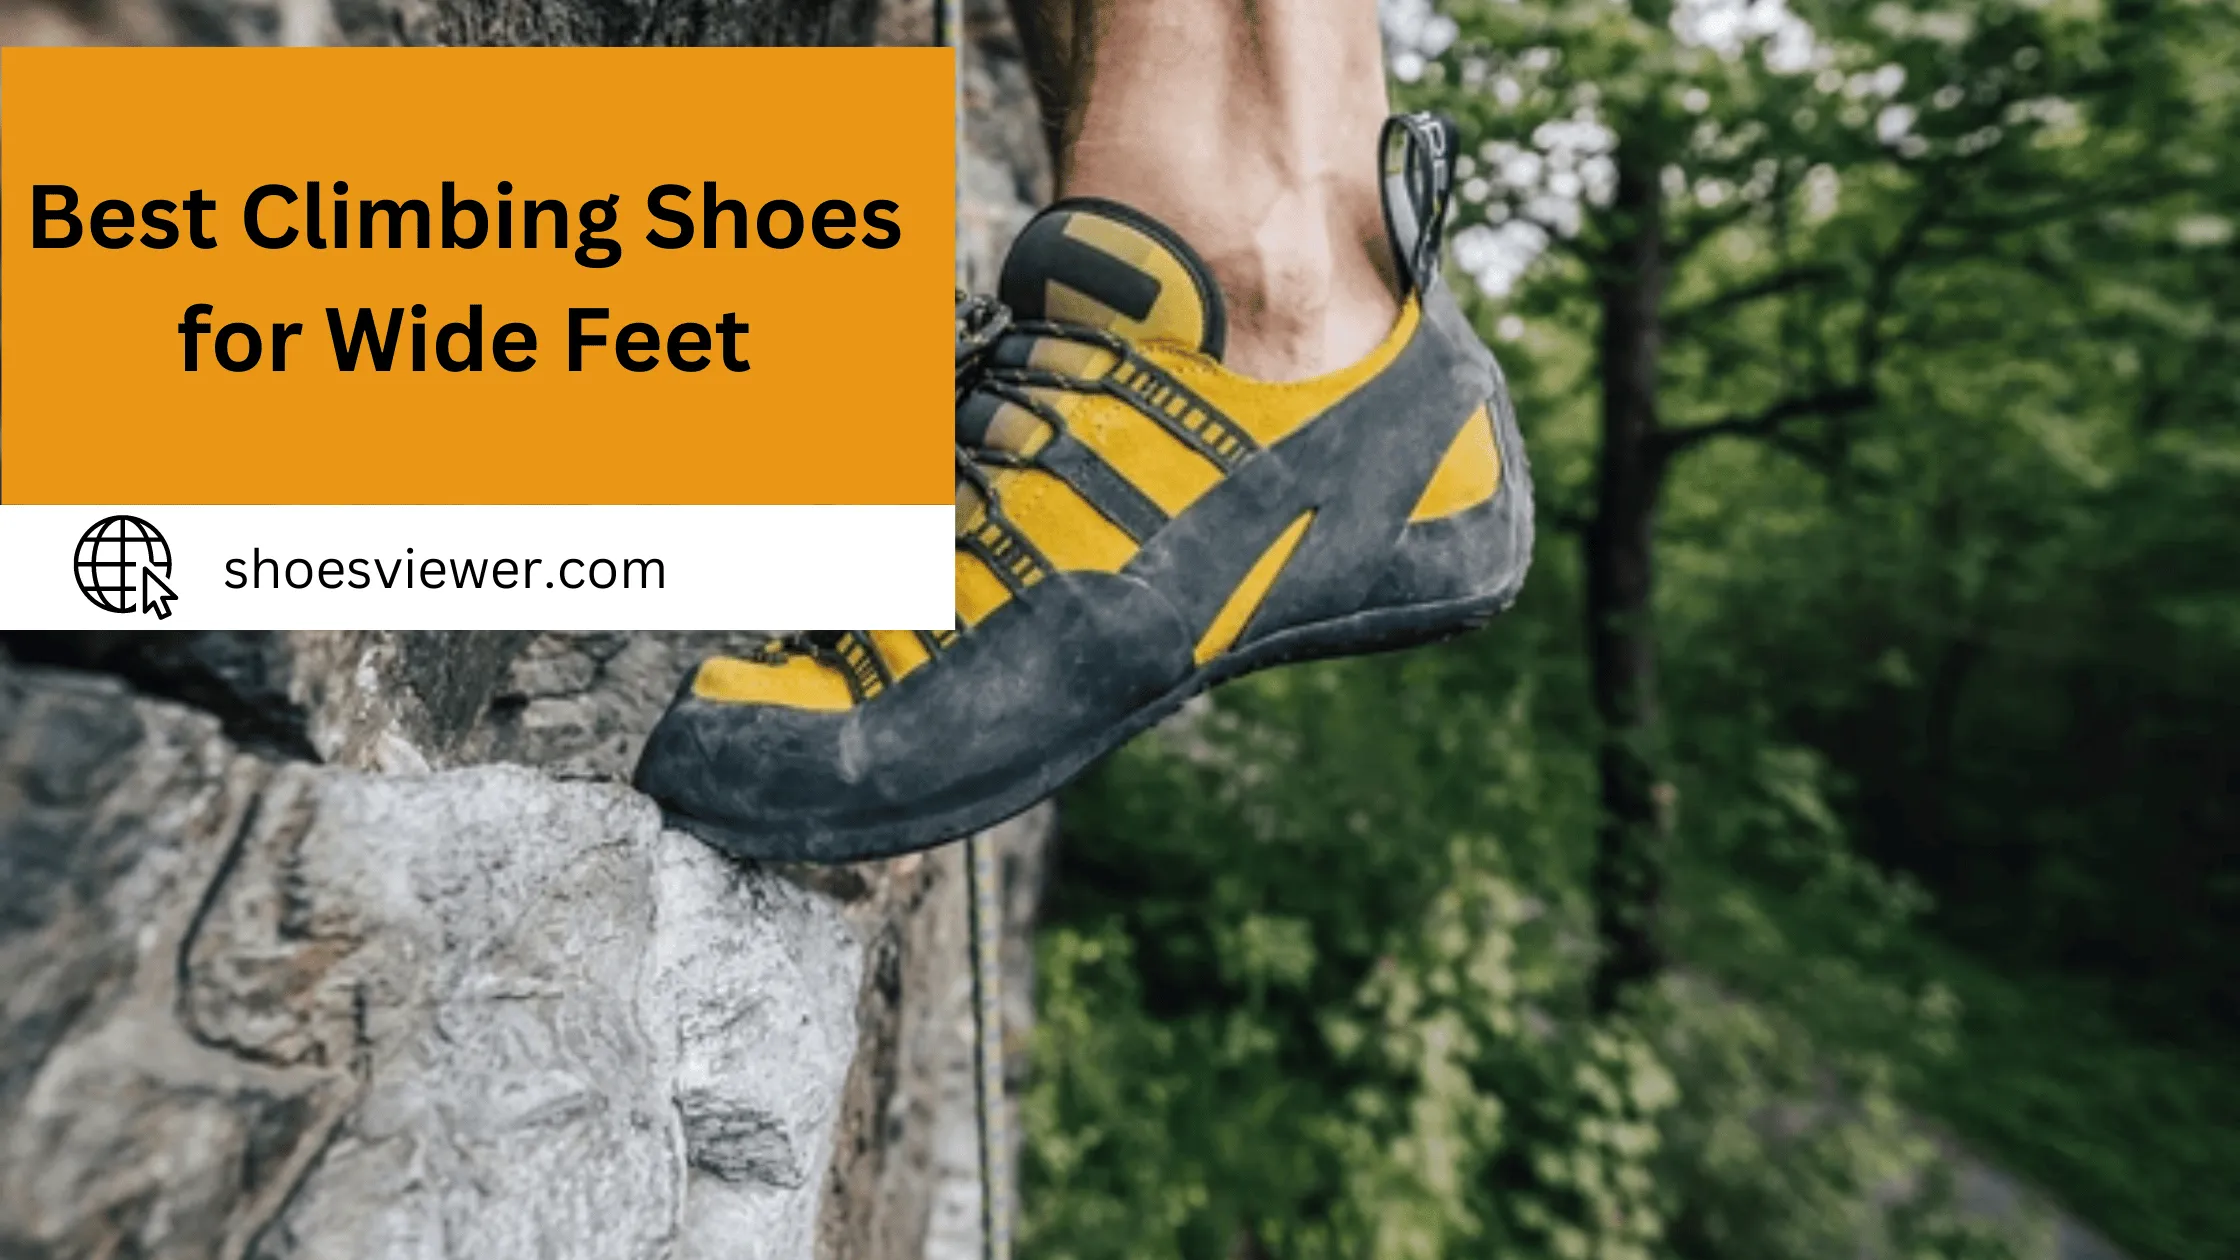 List of Top 10 Best Climbing Shoes For Wide Feet